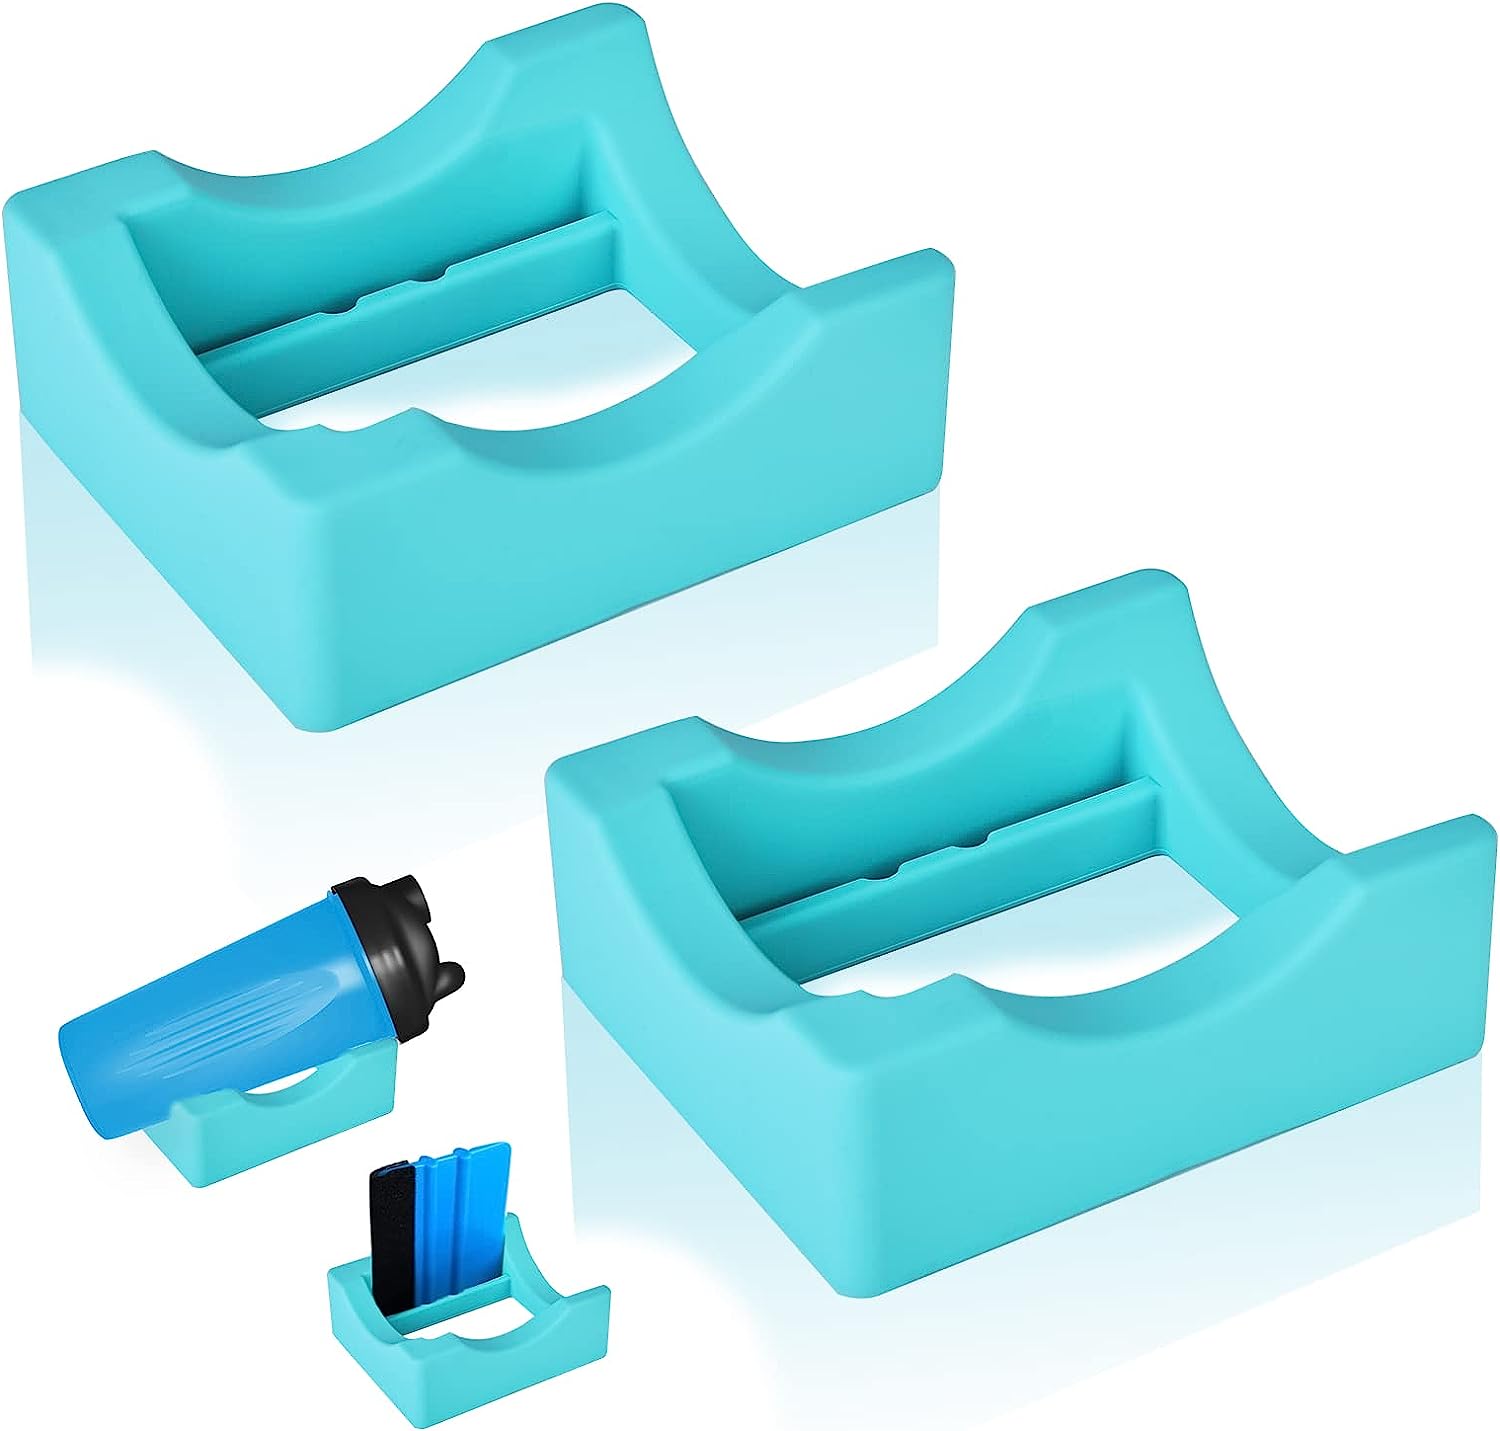 Silicone Cup Cradle – Five Elements Home Essentials